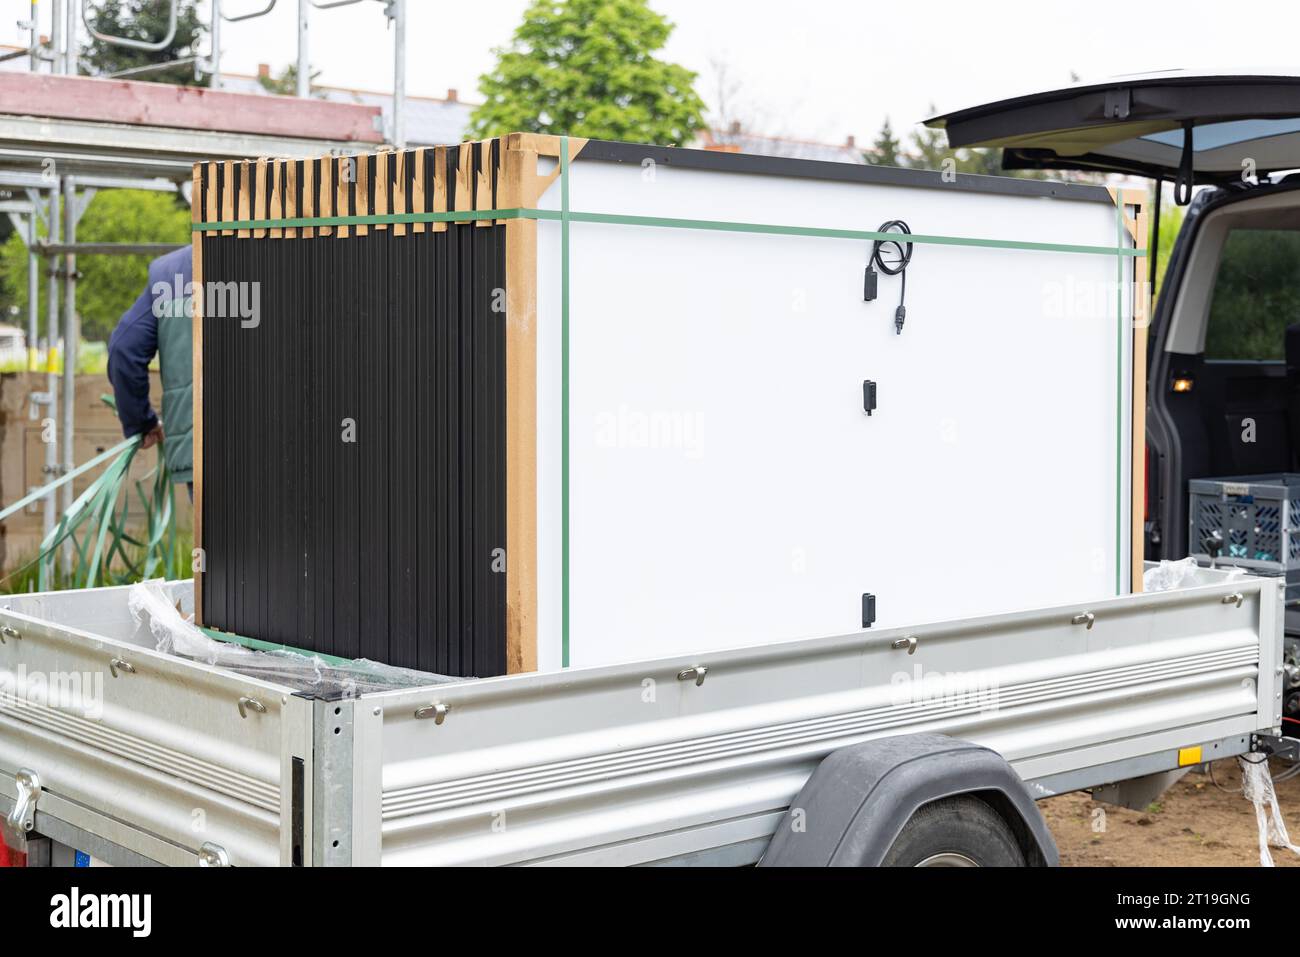 A set of new solar panels transported on a trailer to a construction site Stock Photo